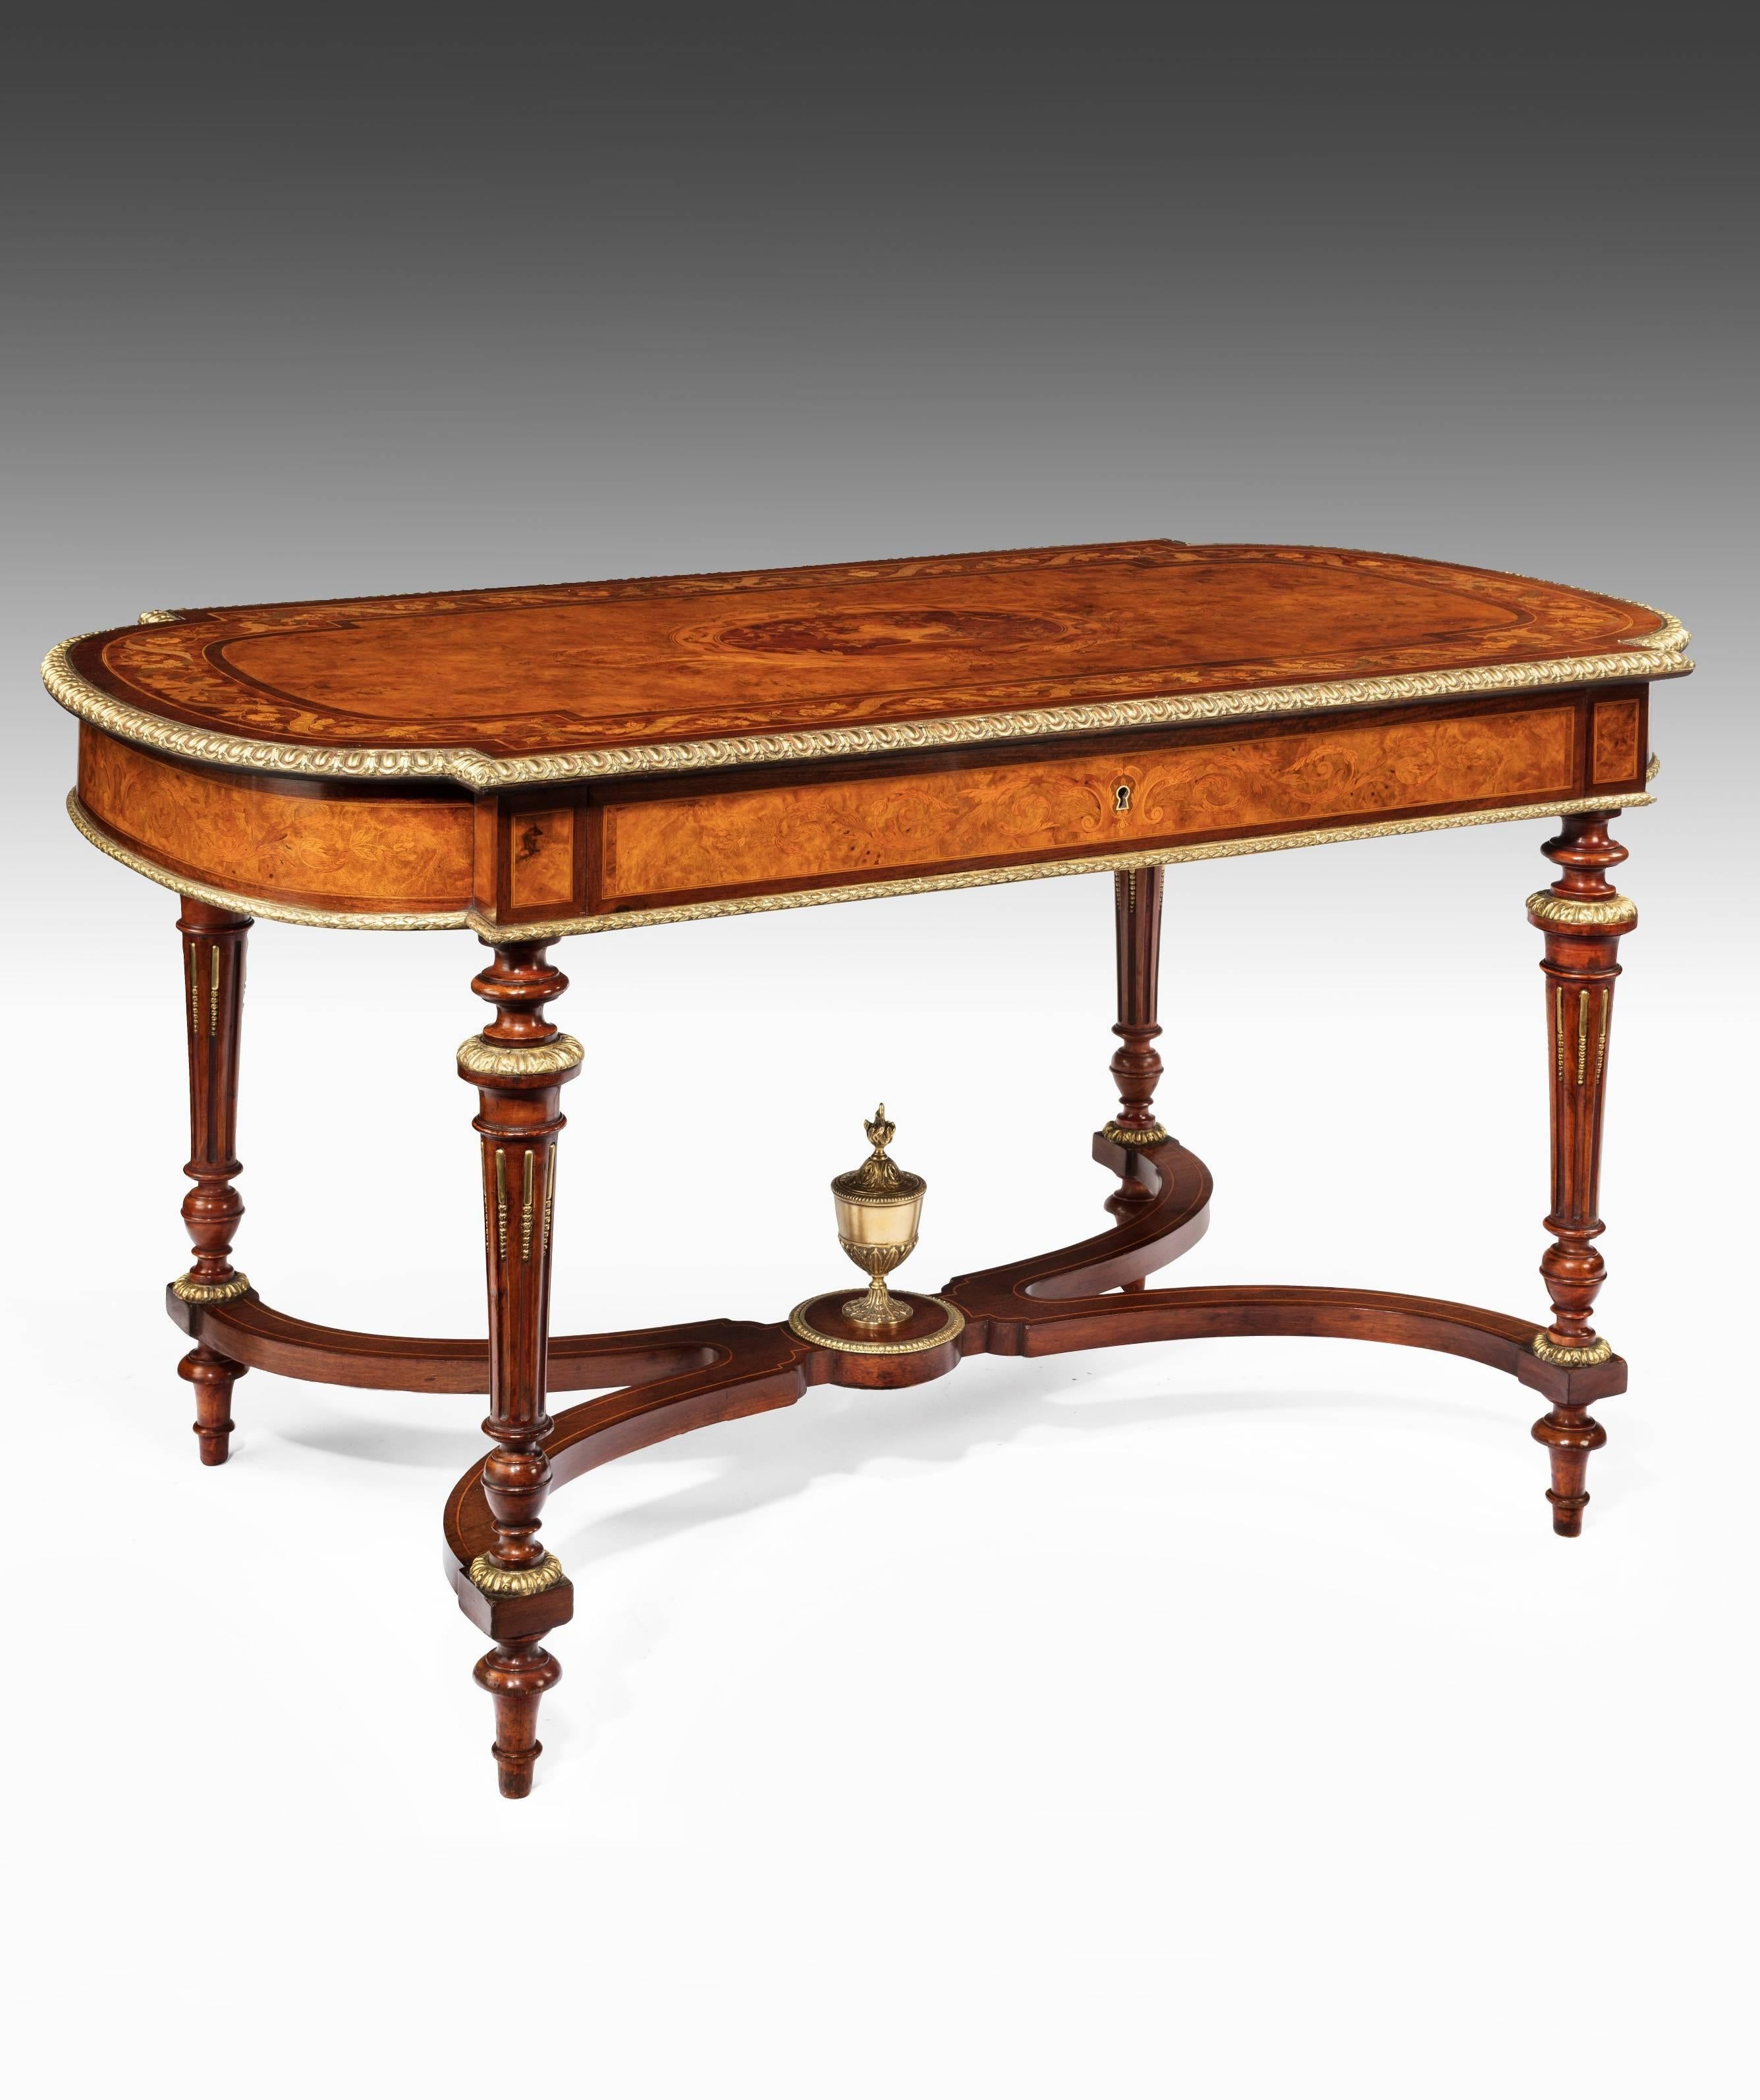 An exceptional quality burr walnut Victorian ormolu-mounted centre / writing / library table in the manner of Holland and Sons with exotic wood marquetry inlay of large proportions.
This is a very rare table to find with the marquetry and ormolu